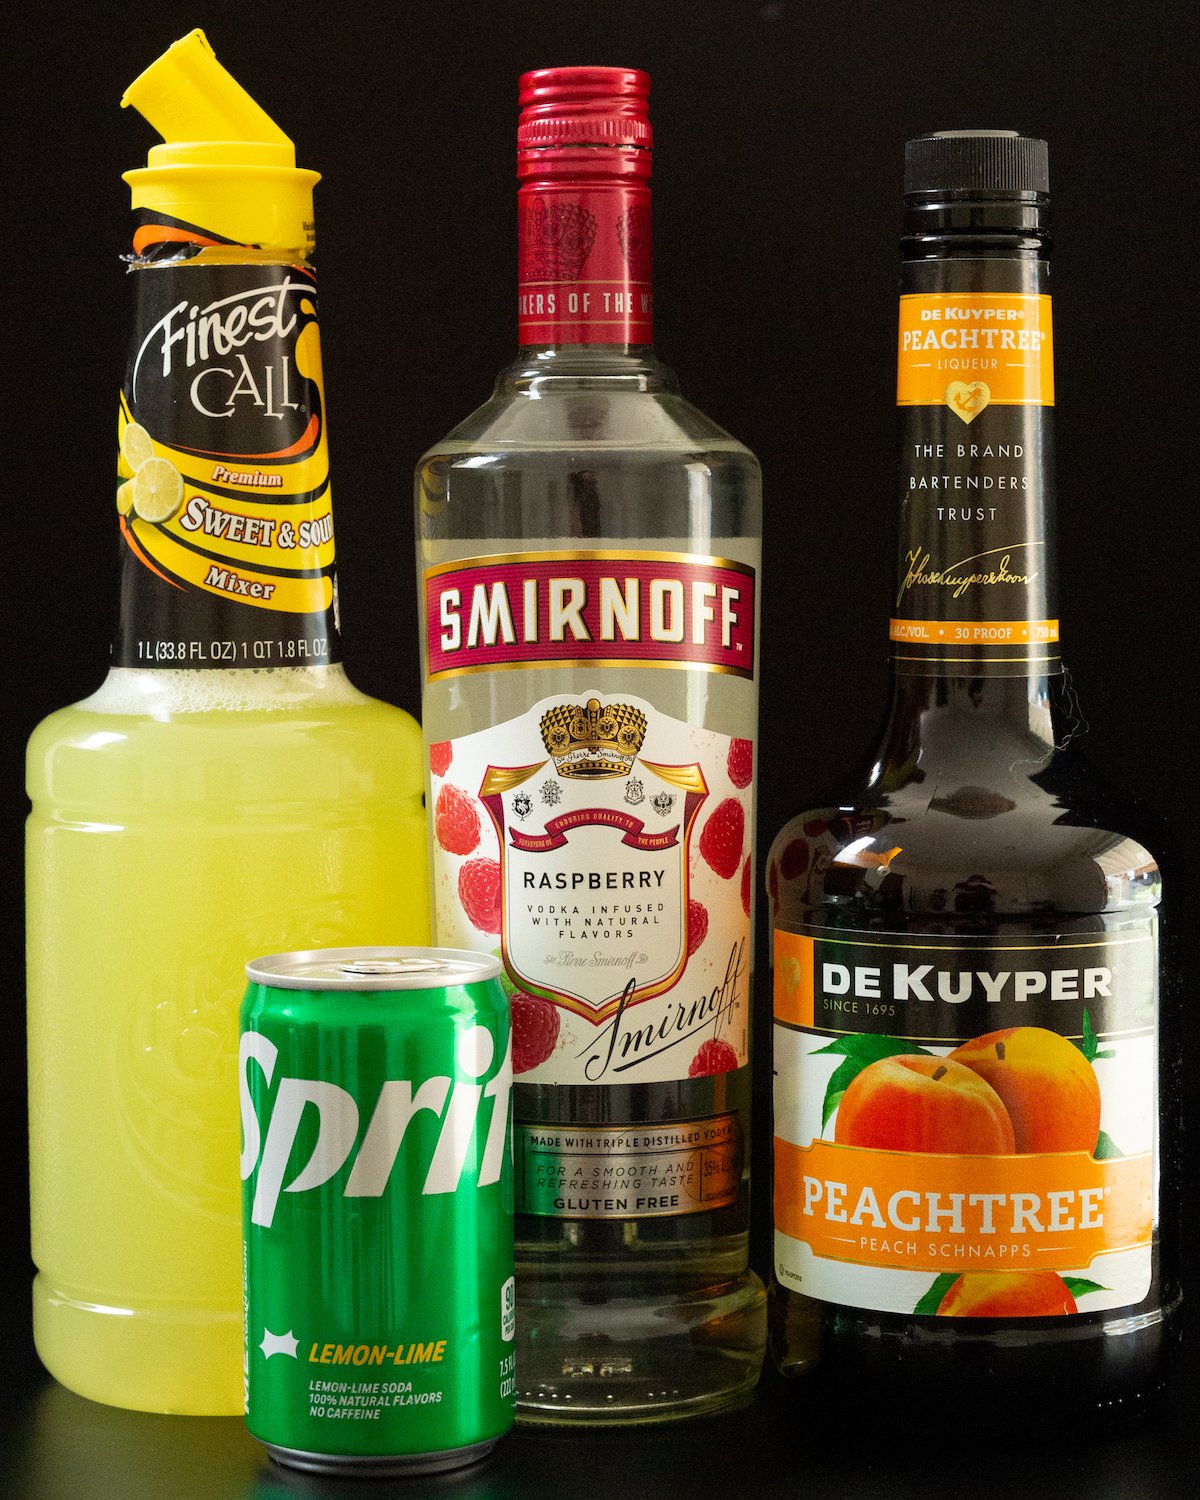 A bottle of sweet and sour mix, raspberry vodka, peach schnapps, and a can of Sprite on a black background.